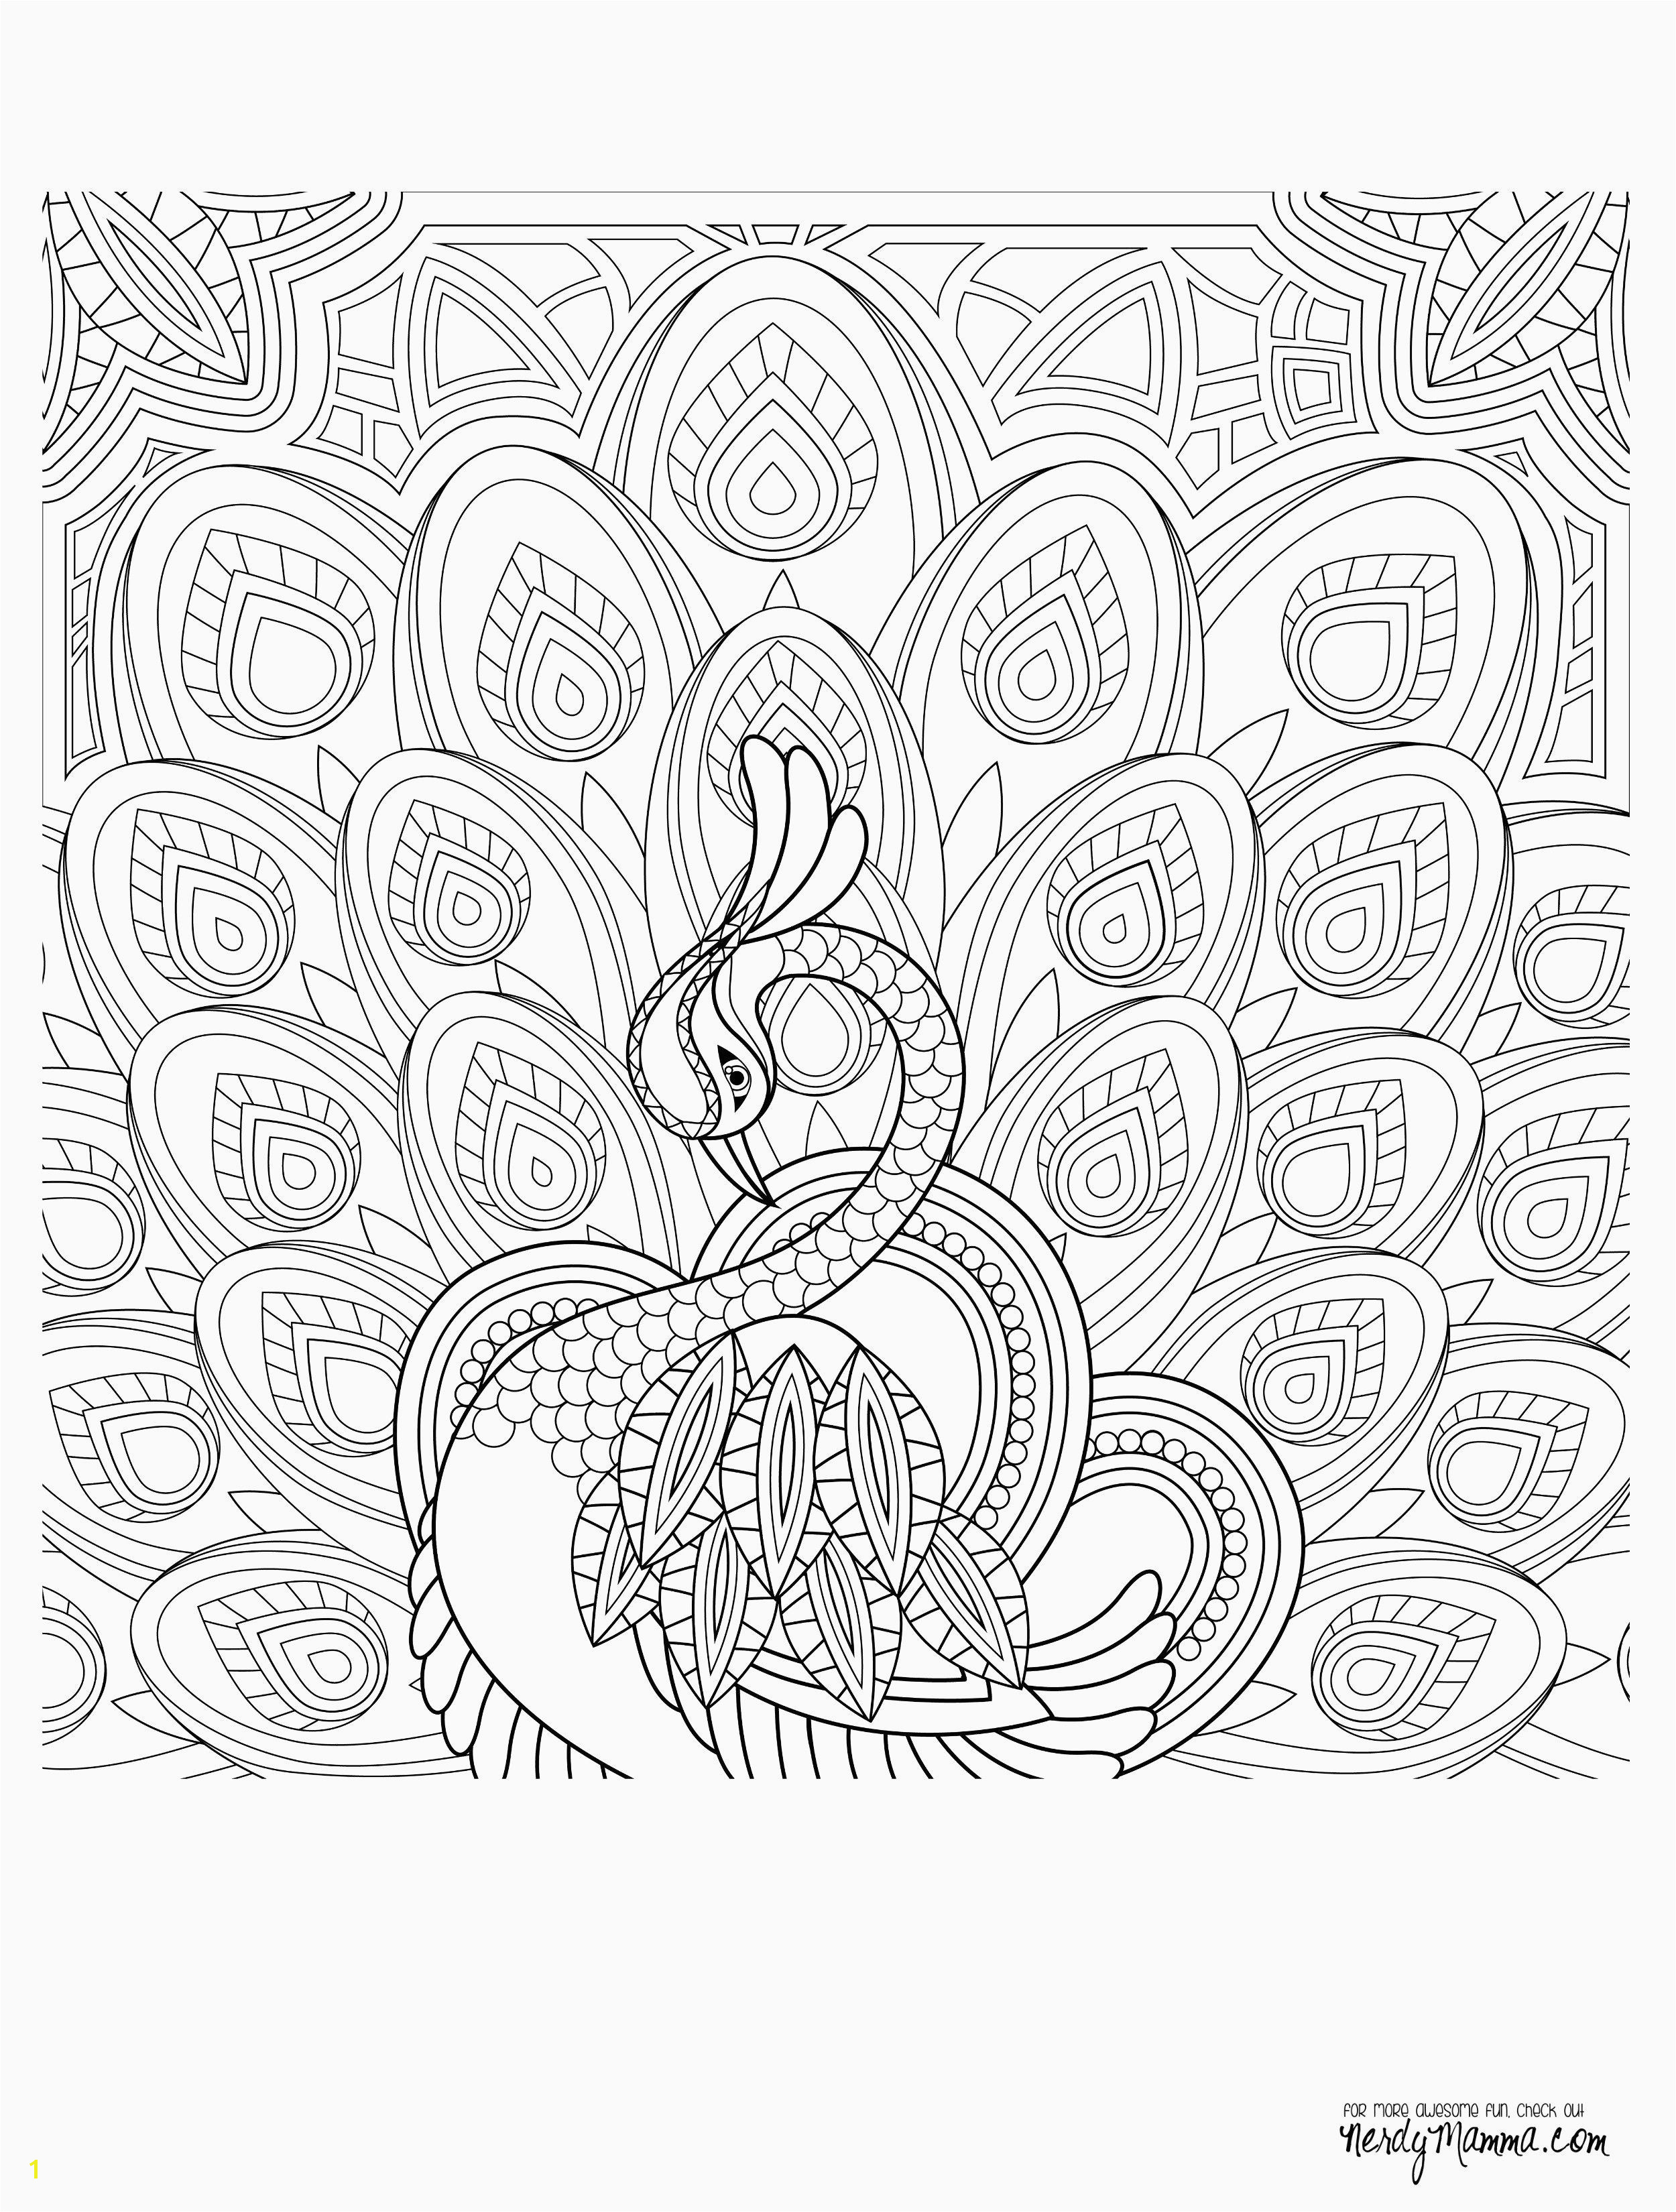 Free Printable Coloring Pages For Adults Best Awesome Coloring Page For Adult Od Kids Simple Floral Heart With